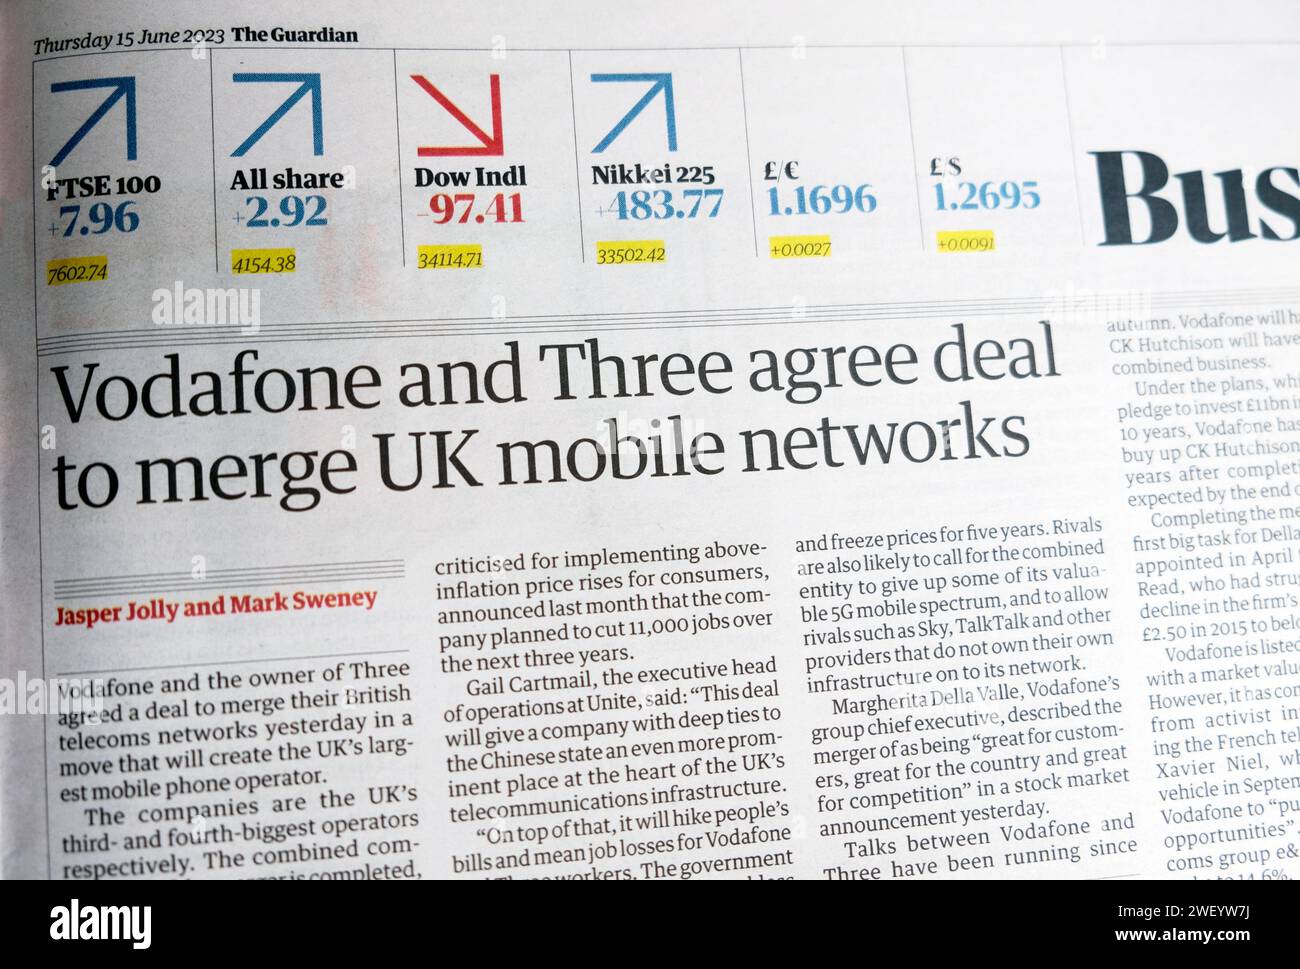 'Vodafone and Three agree deal to merge UK mobile networks' Guardian newspaper headline business article 15 June 2023 London England UK 15 June 2023 Stock Photo